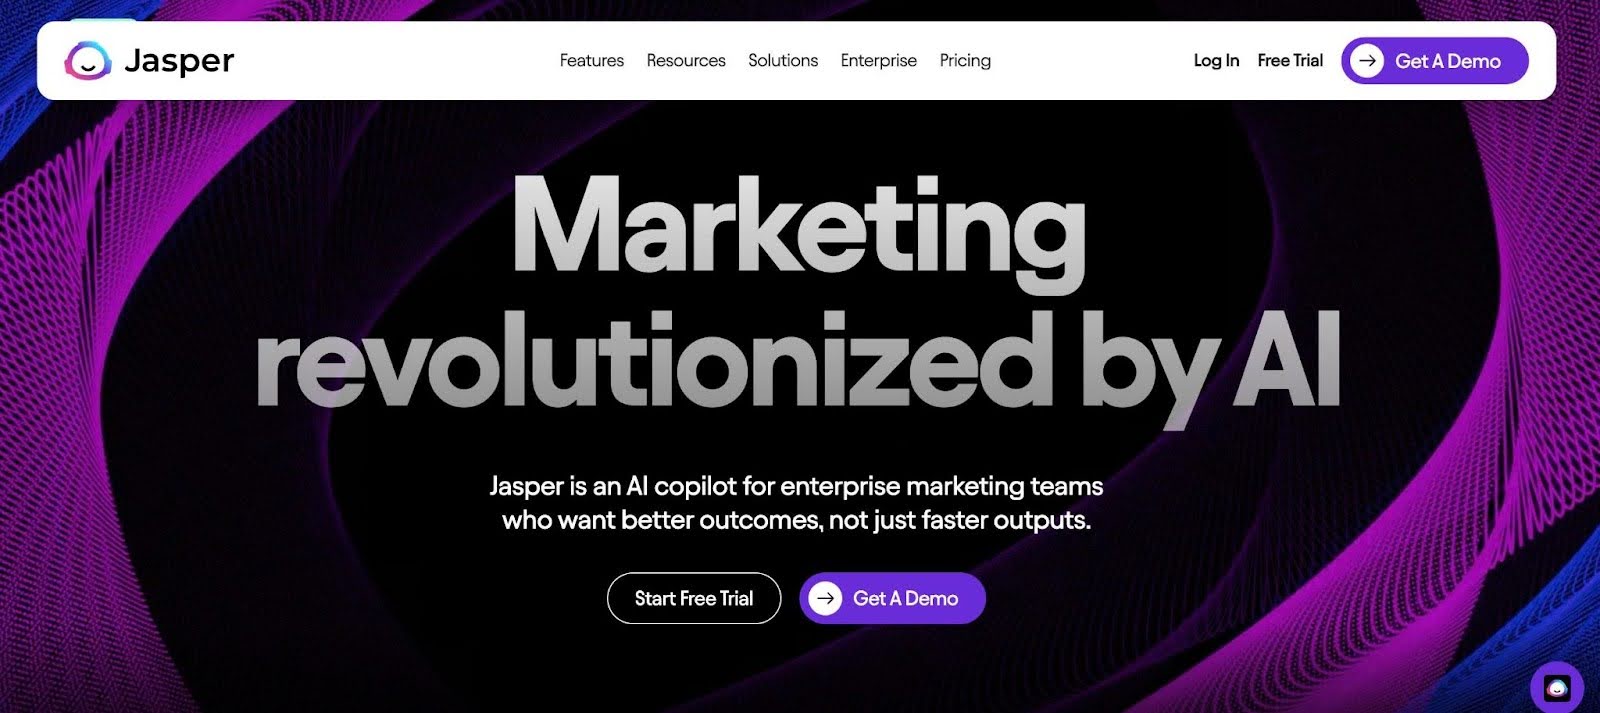 Jasper homepage text: marketing revolutionized by AI with CTAs to get a demo or start free trial.